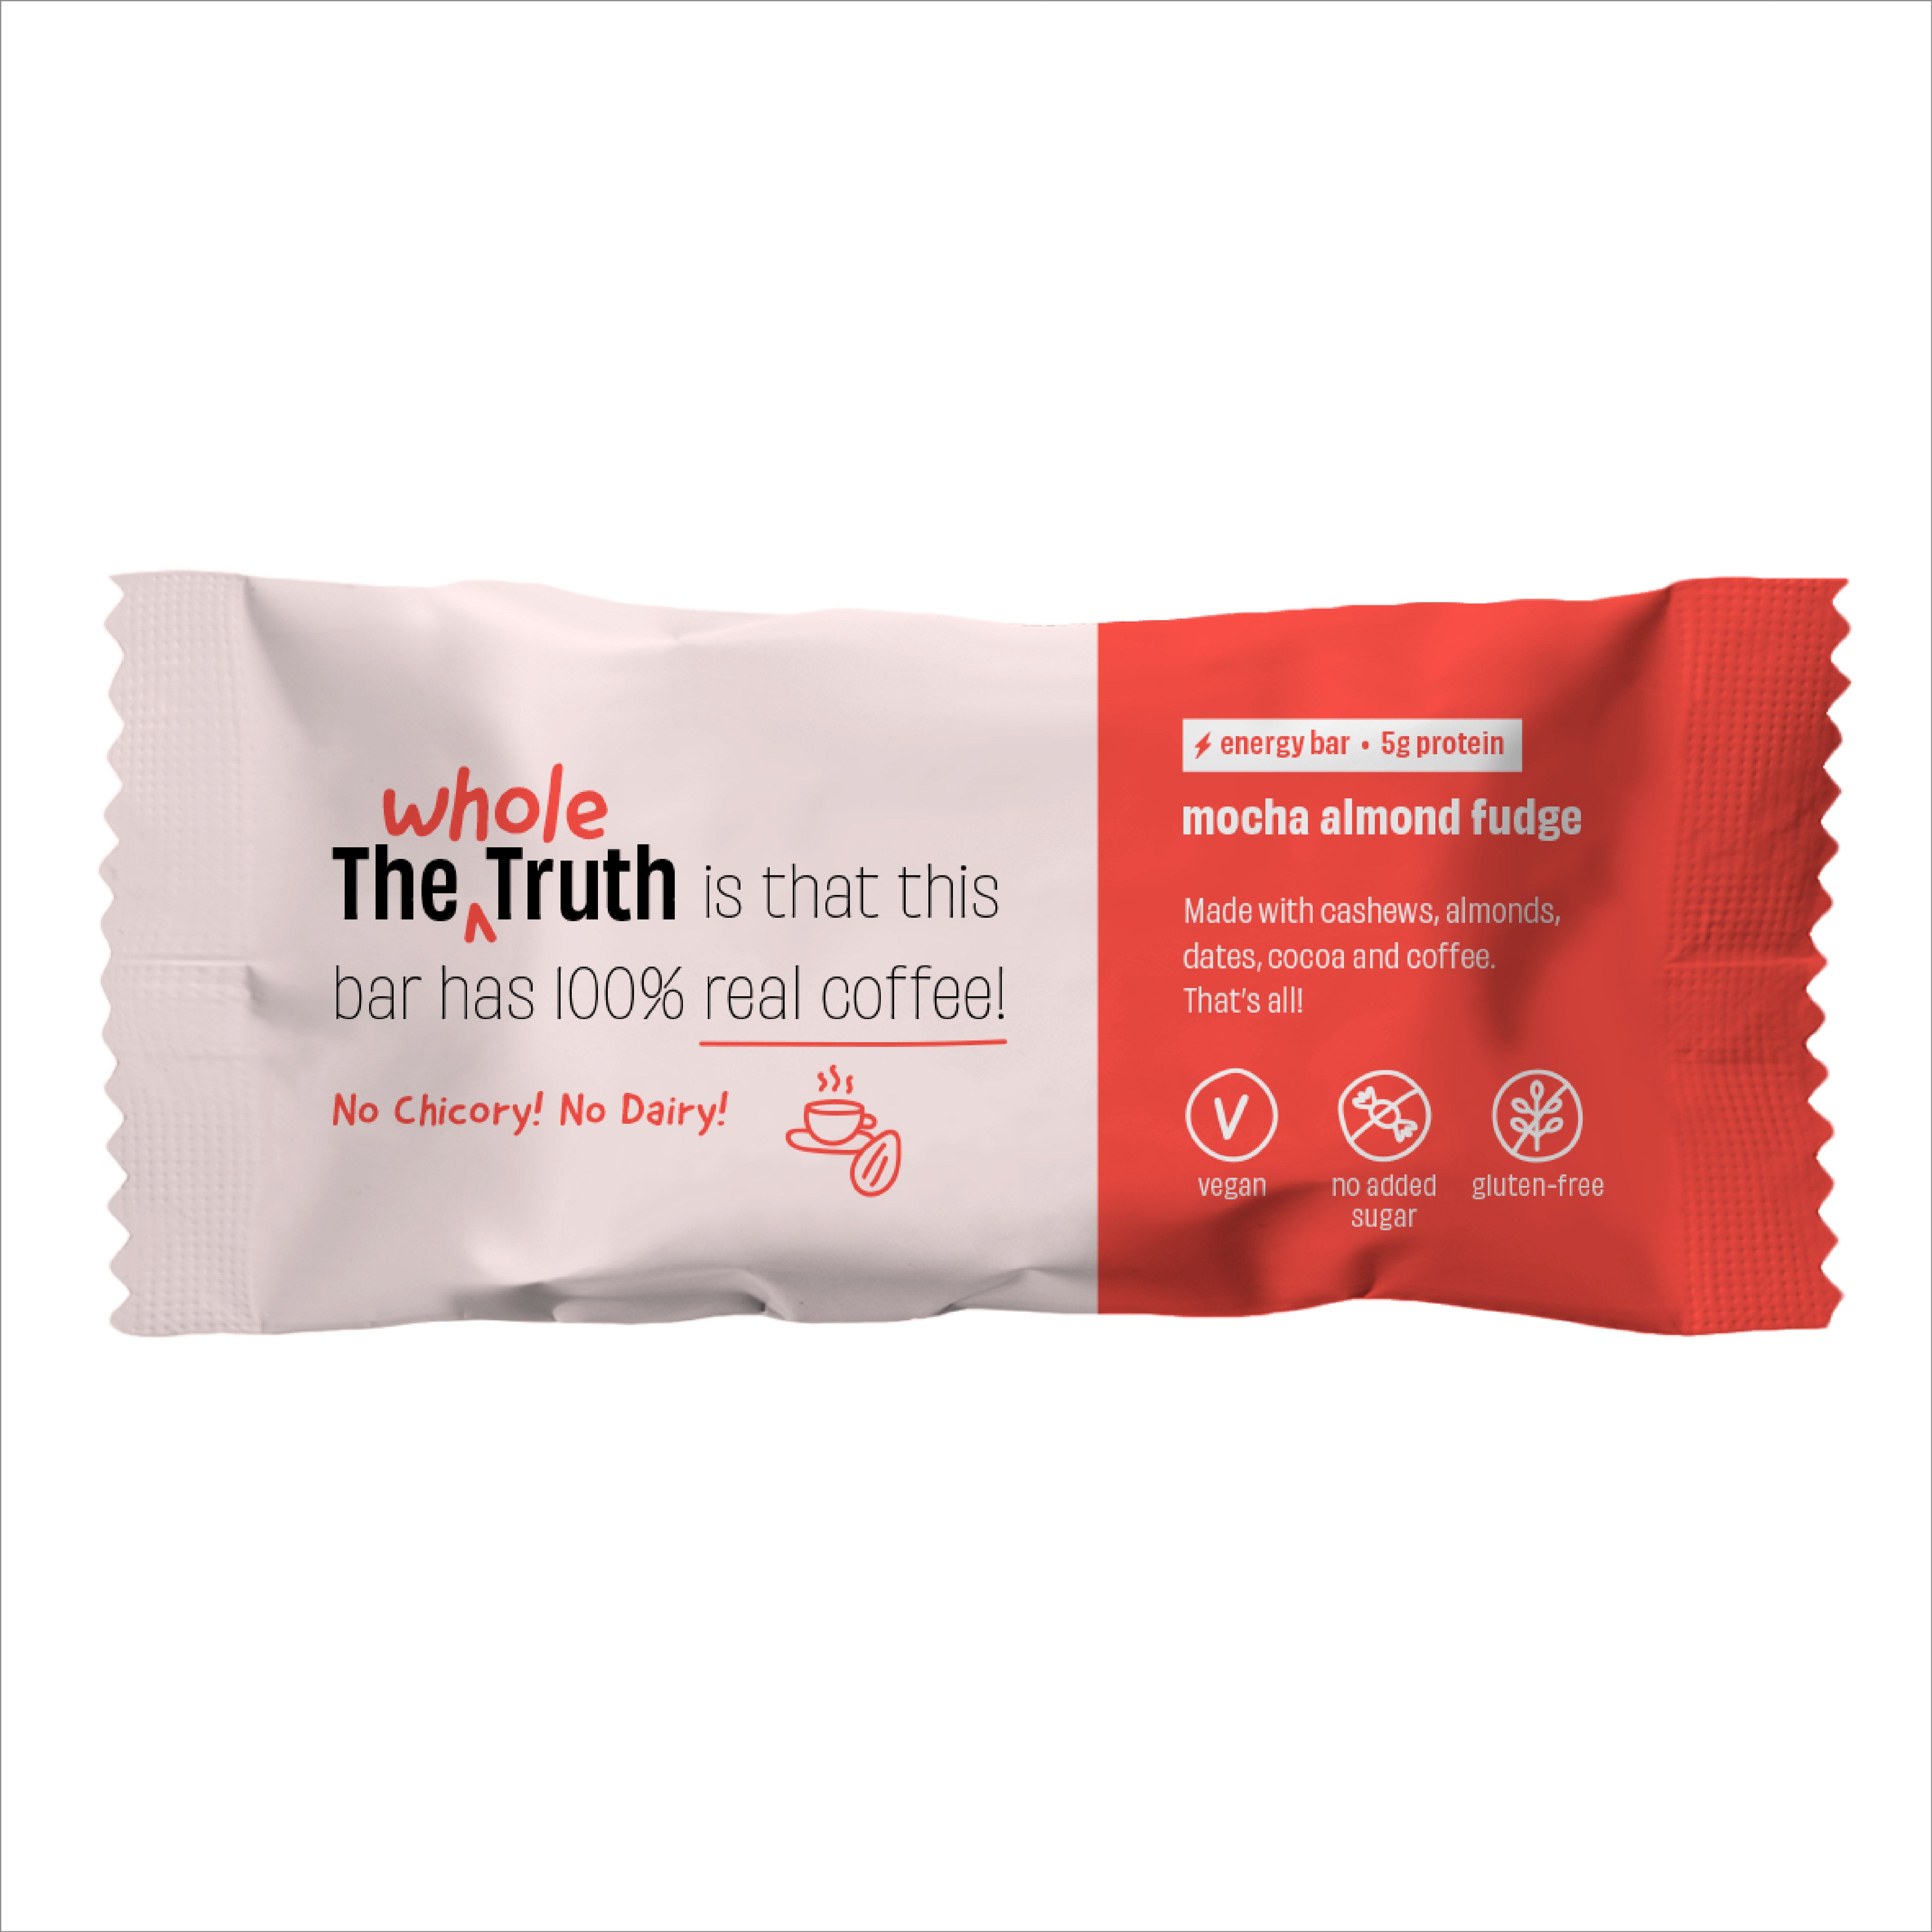 The Whole Truth - Energy Bars | Mocha Almond Fudge | Pack of 6 x 40g | Dairy Free & Sugarfree | No Artificial Sweeteners | Vegan | No Preservatives | All Natural | Healthy Snack